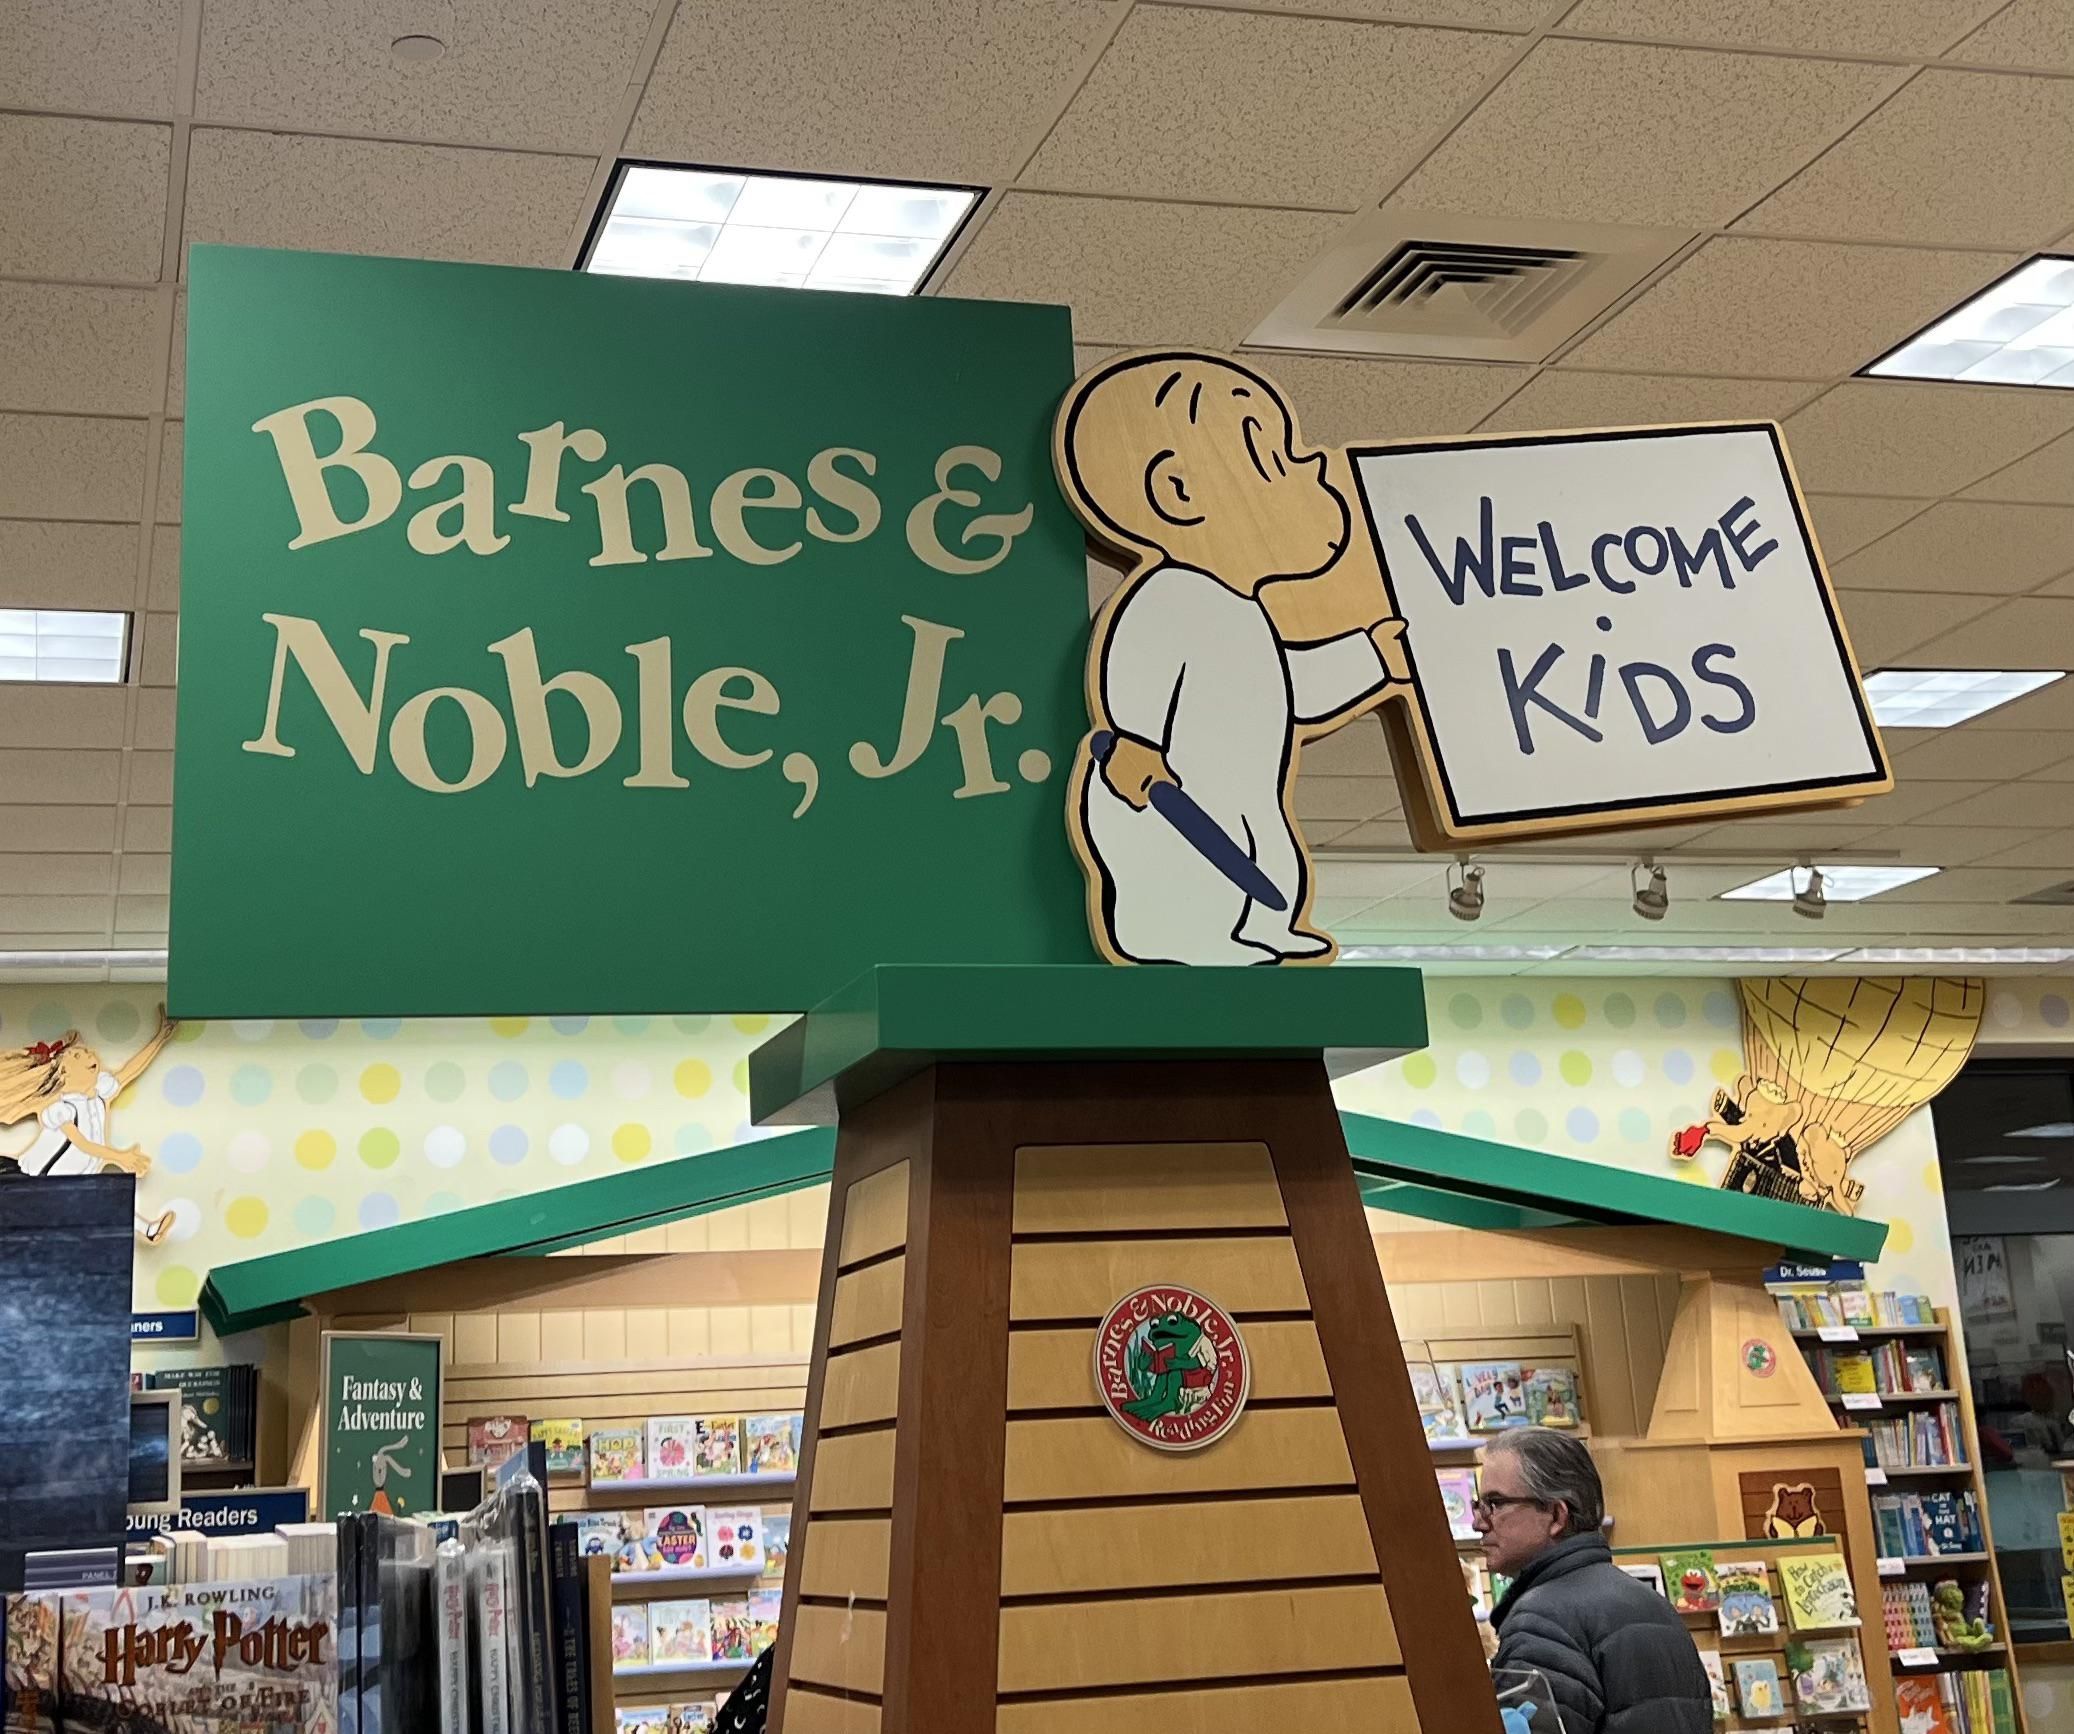 Just came to barns and noble with my son, he asked me why is the baby holding a knife… weird stuff going on here…